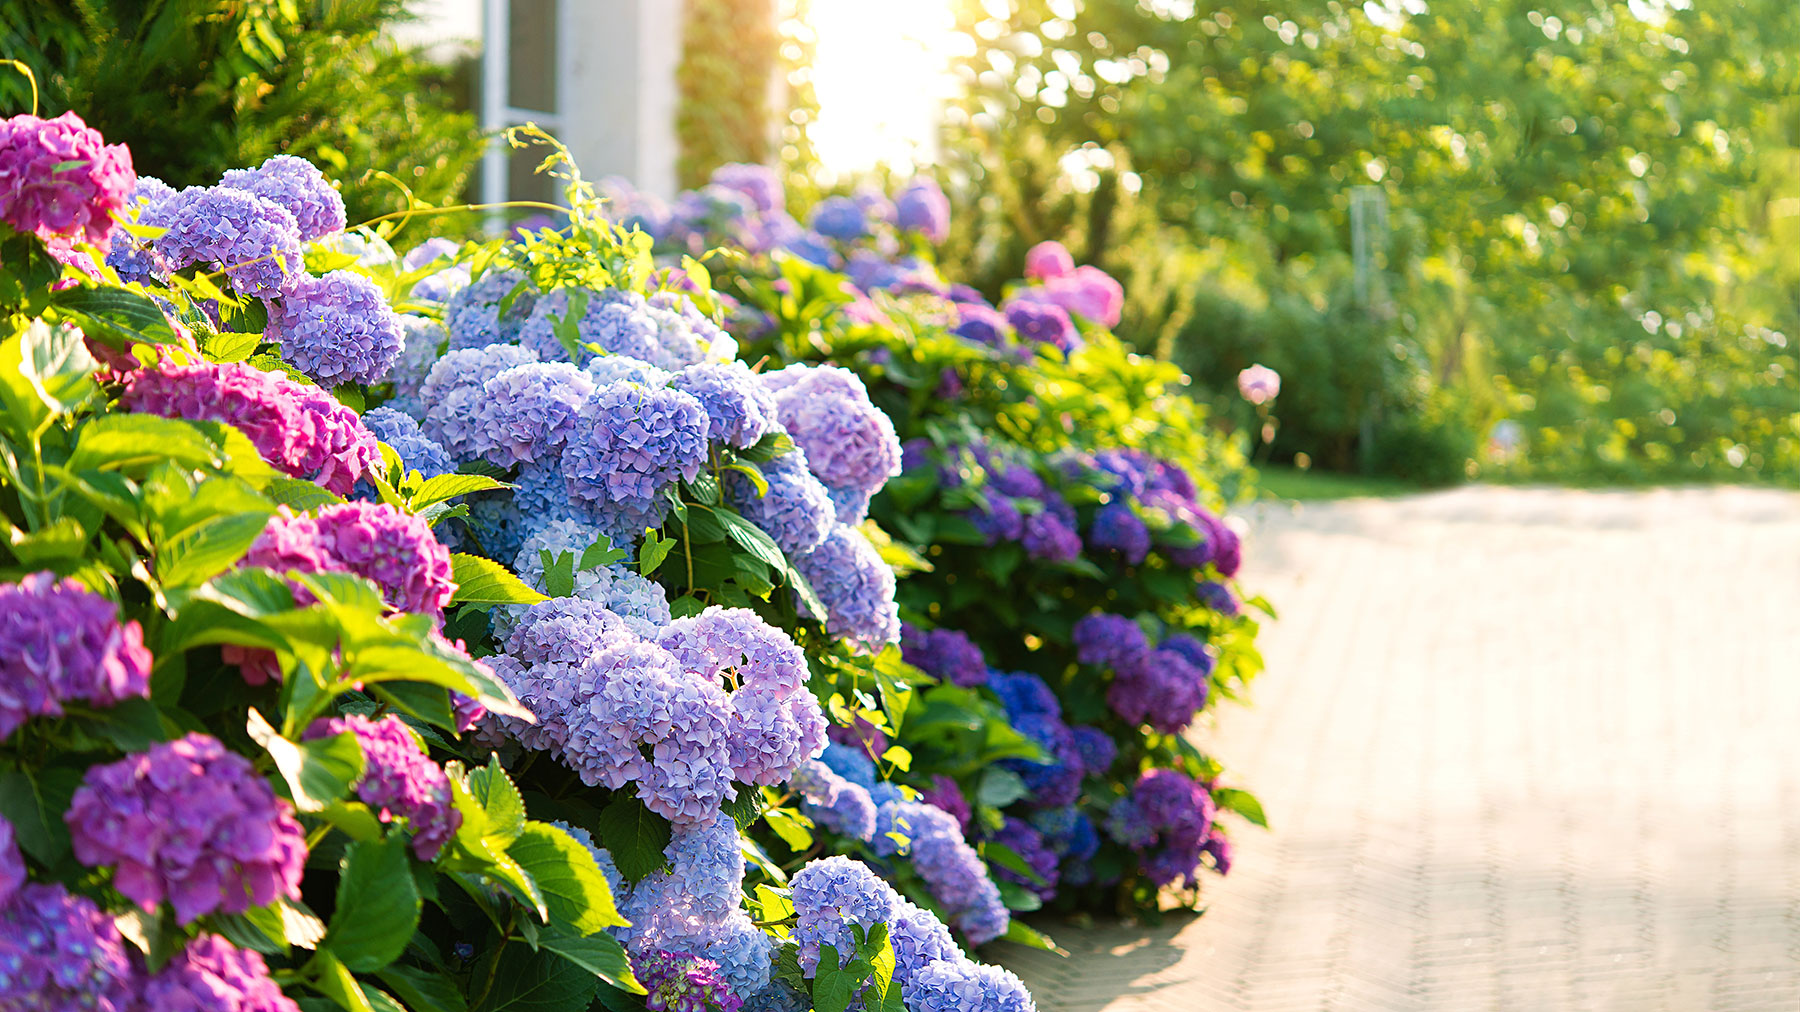 Sunlight on a display of hydrangeas in a front garden